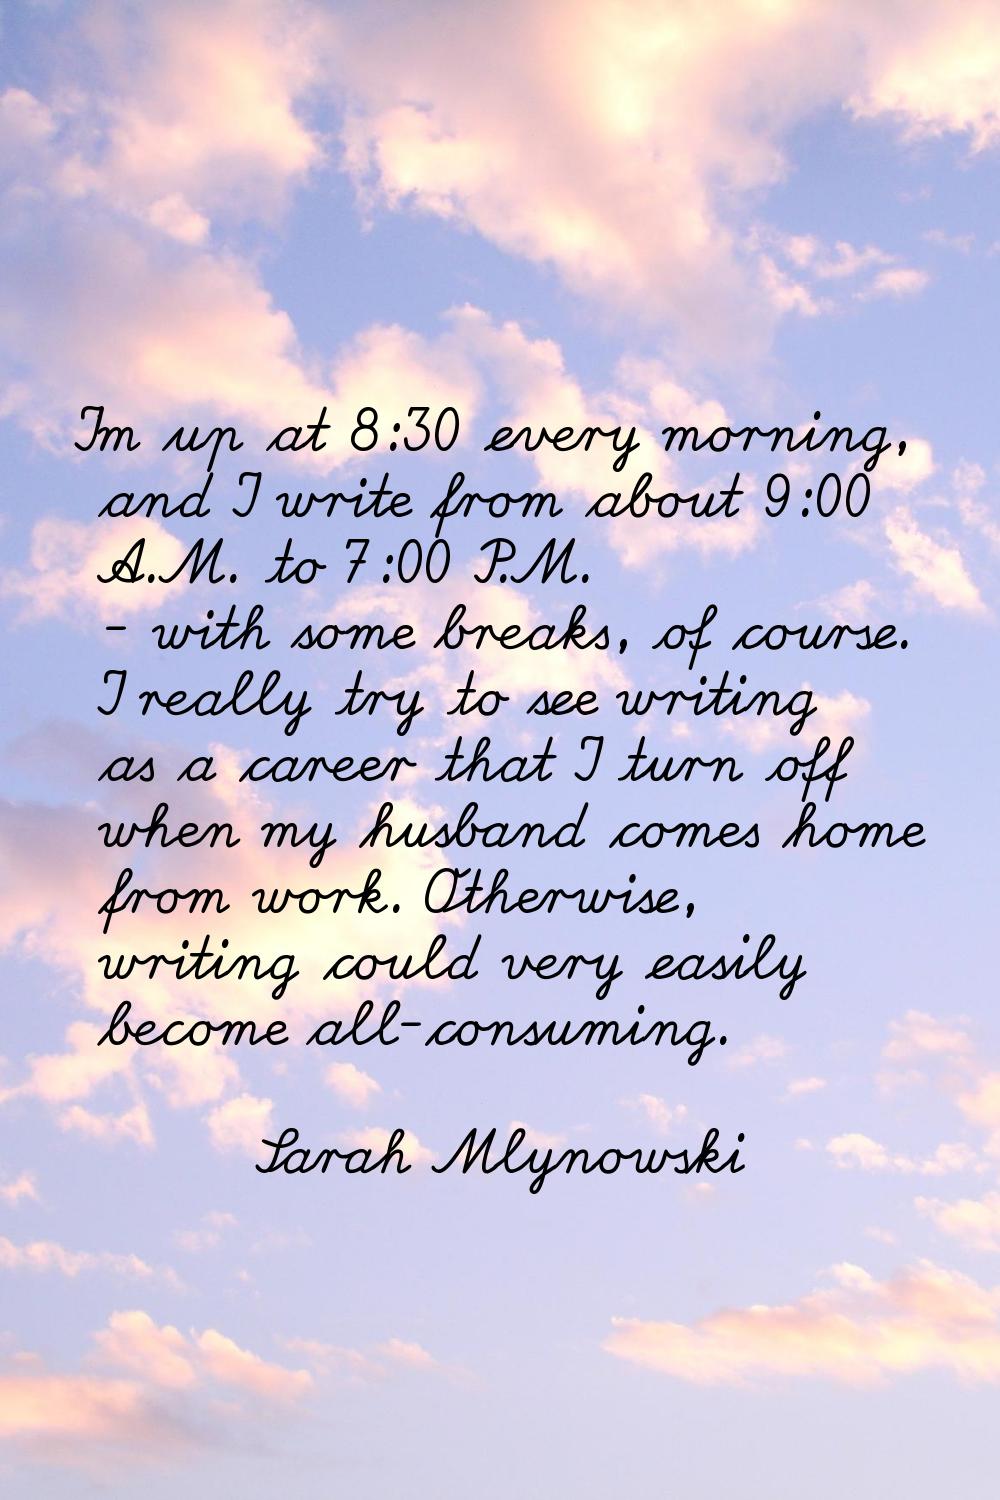 I'm up at 8:30 every morning, and I write from about 9:00 A.M. to 7:00 P.M. - with some breaks, of 